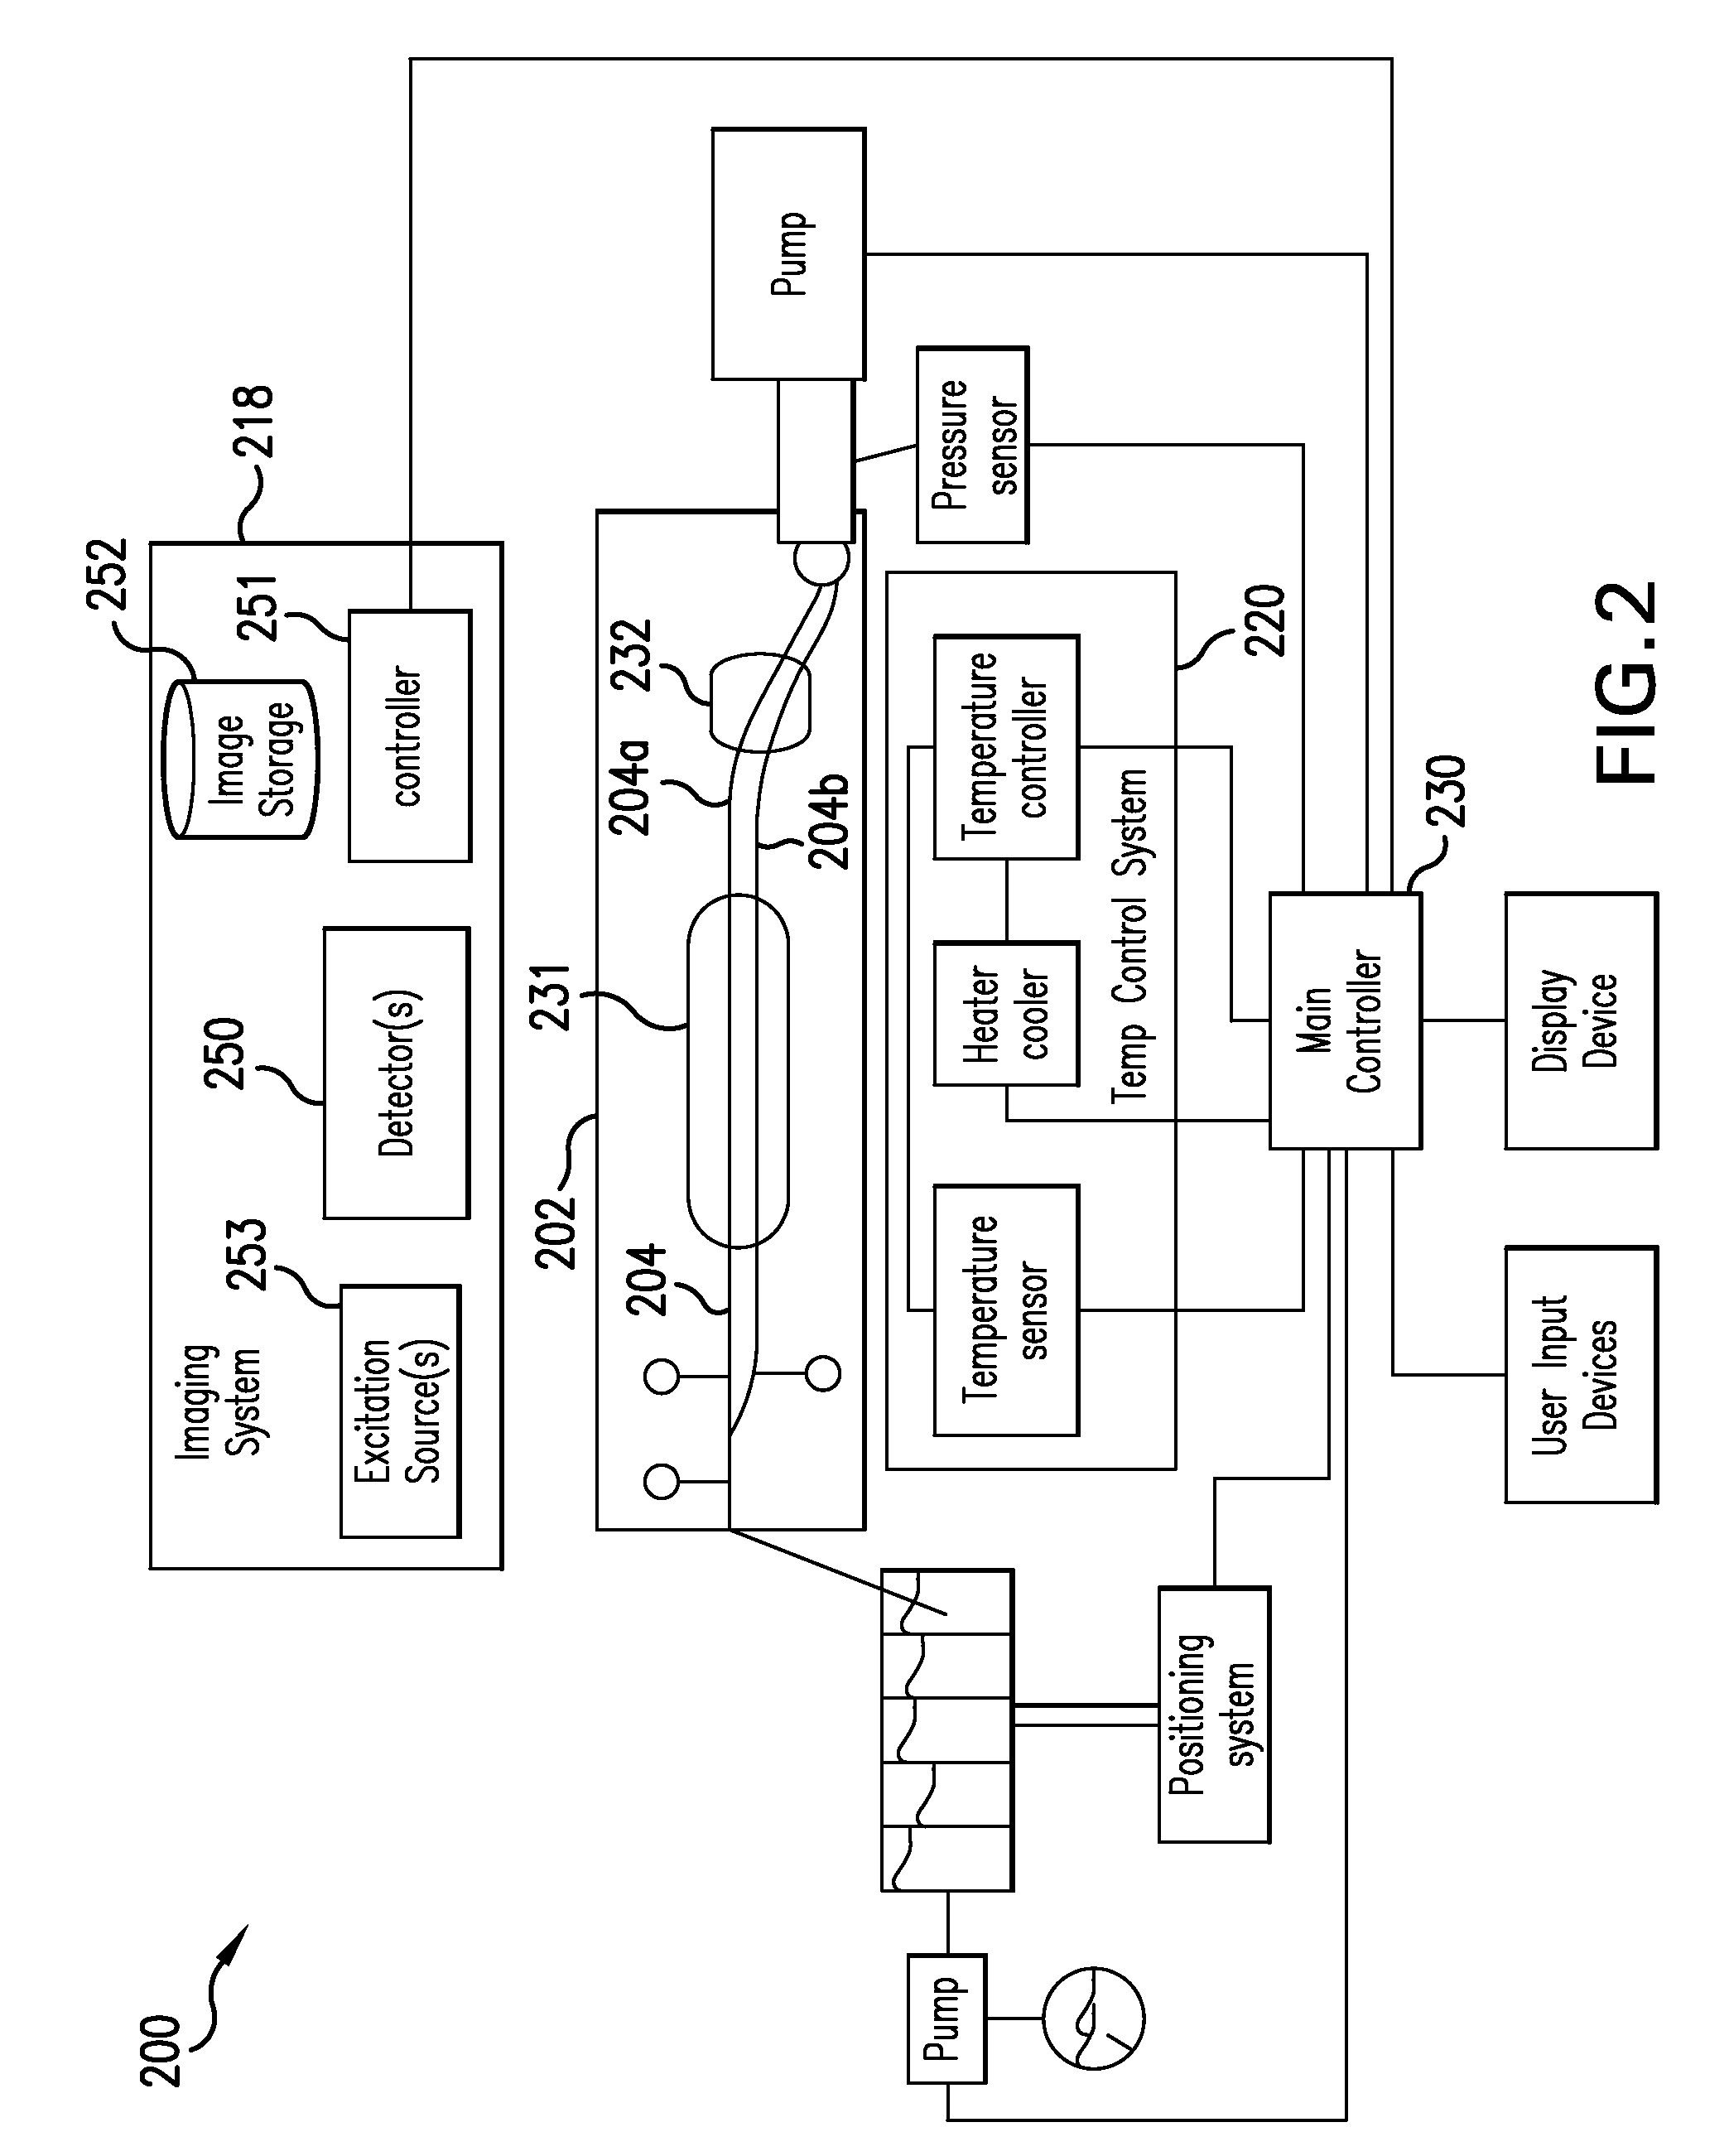 Systems and methods for monitoring the amplification of DNA